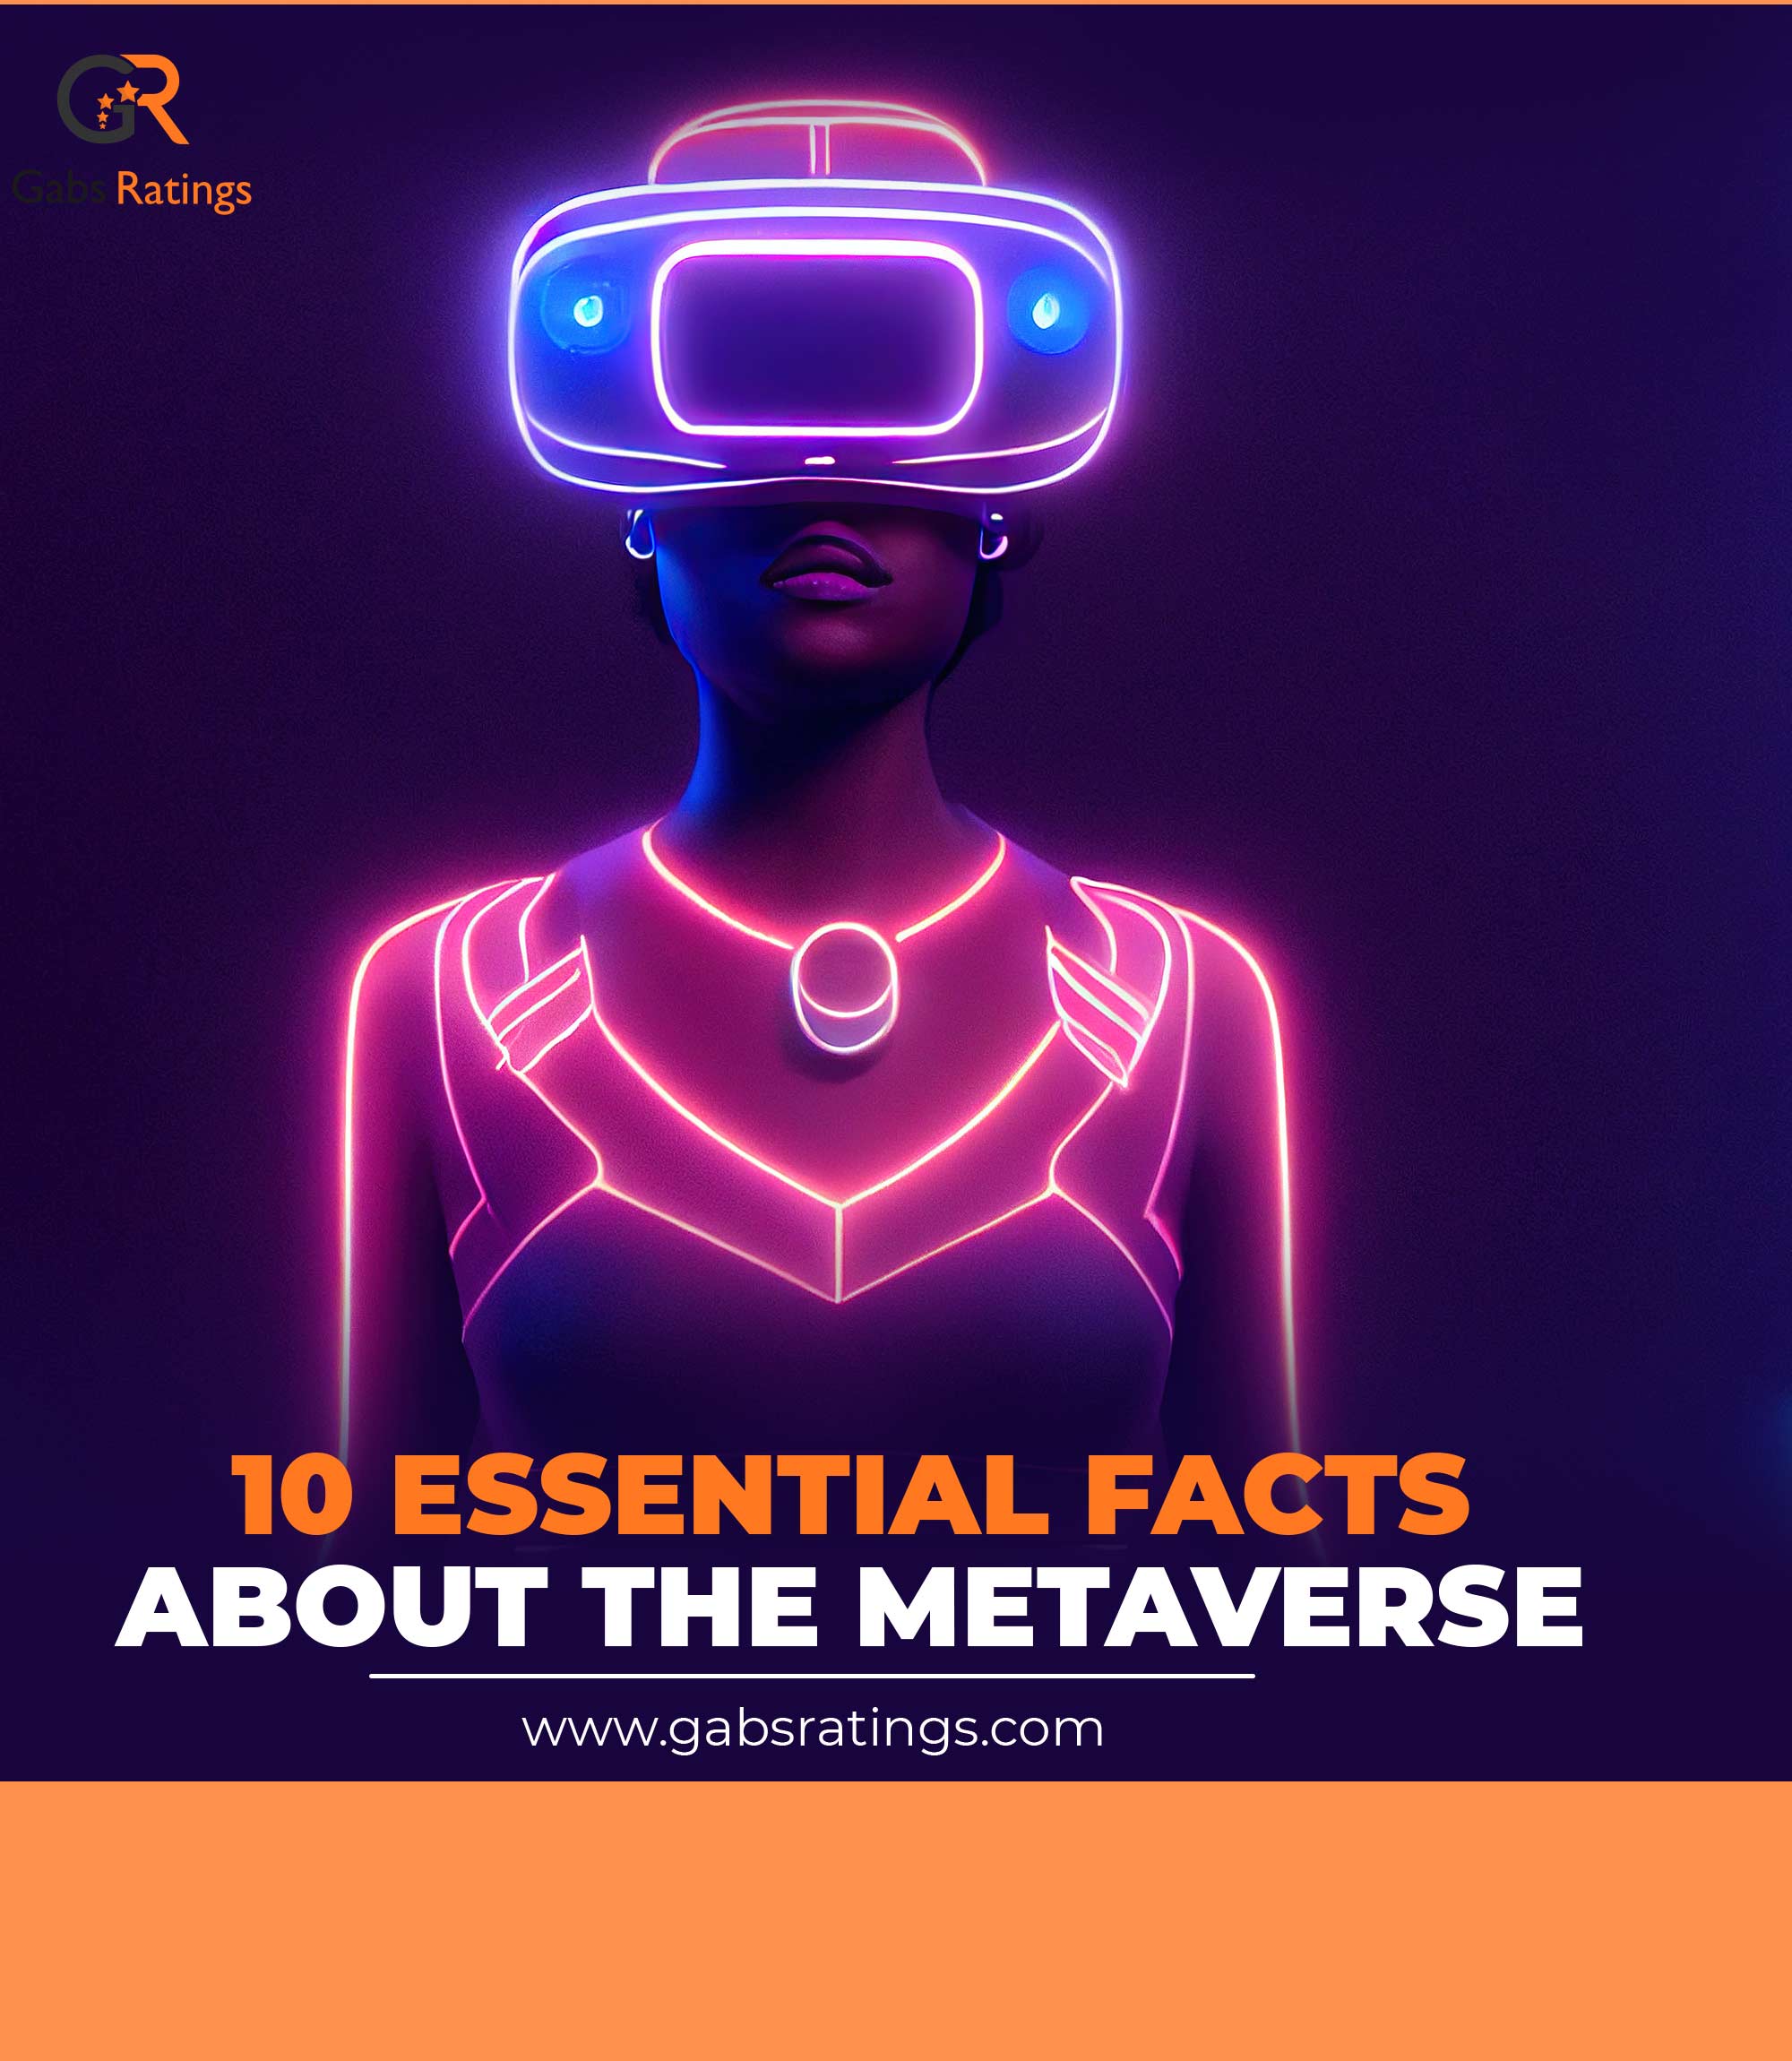 How Online Courses Can Leverage the Metaverse for Learning and Teaching